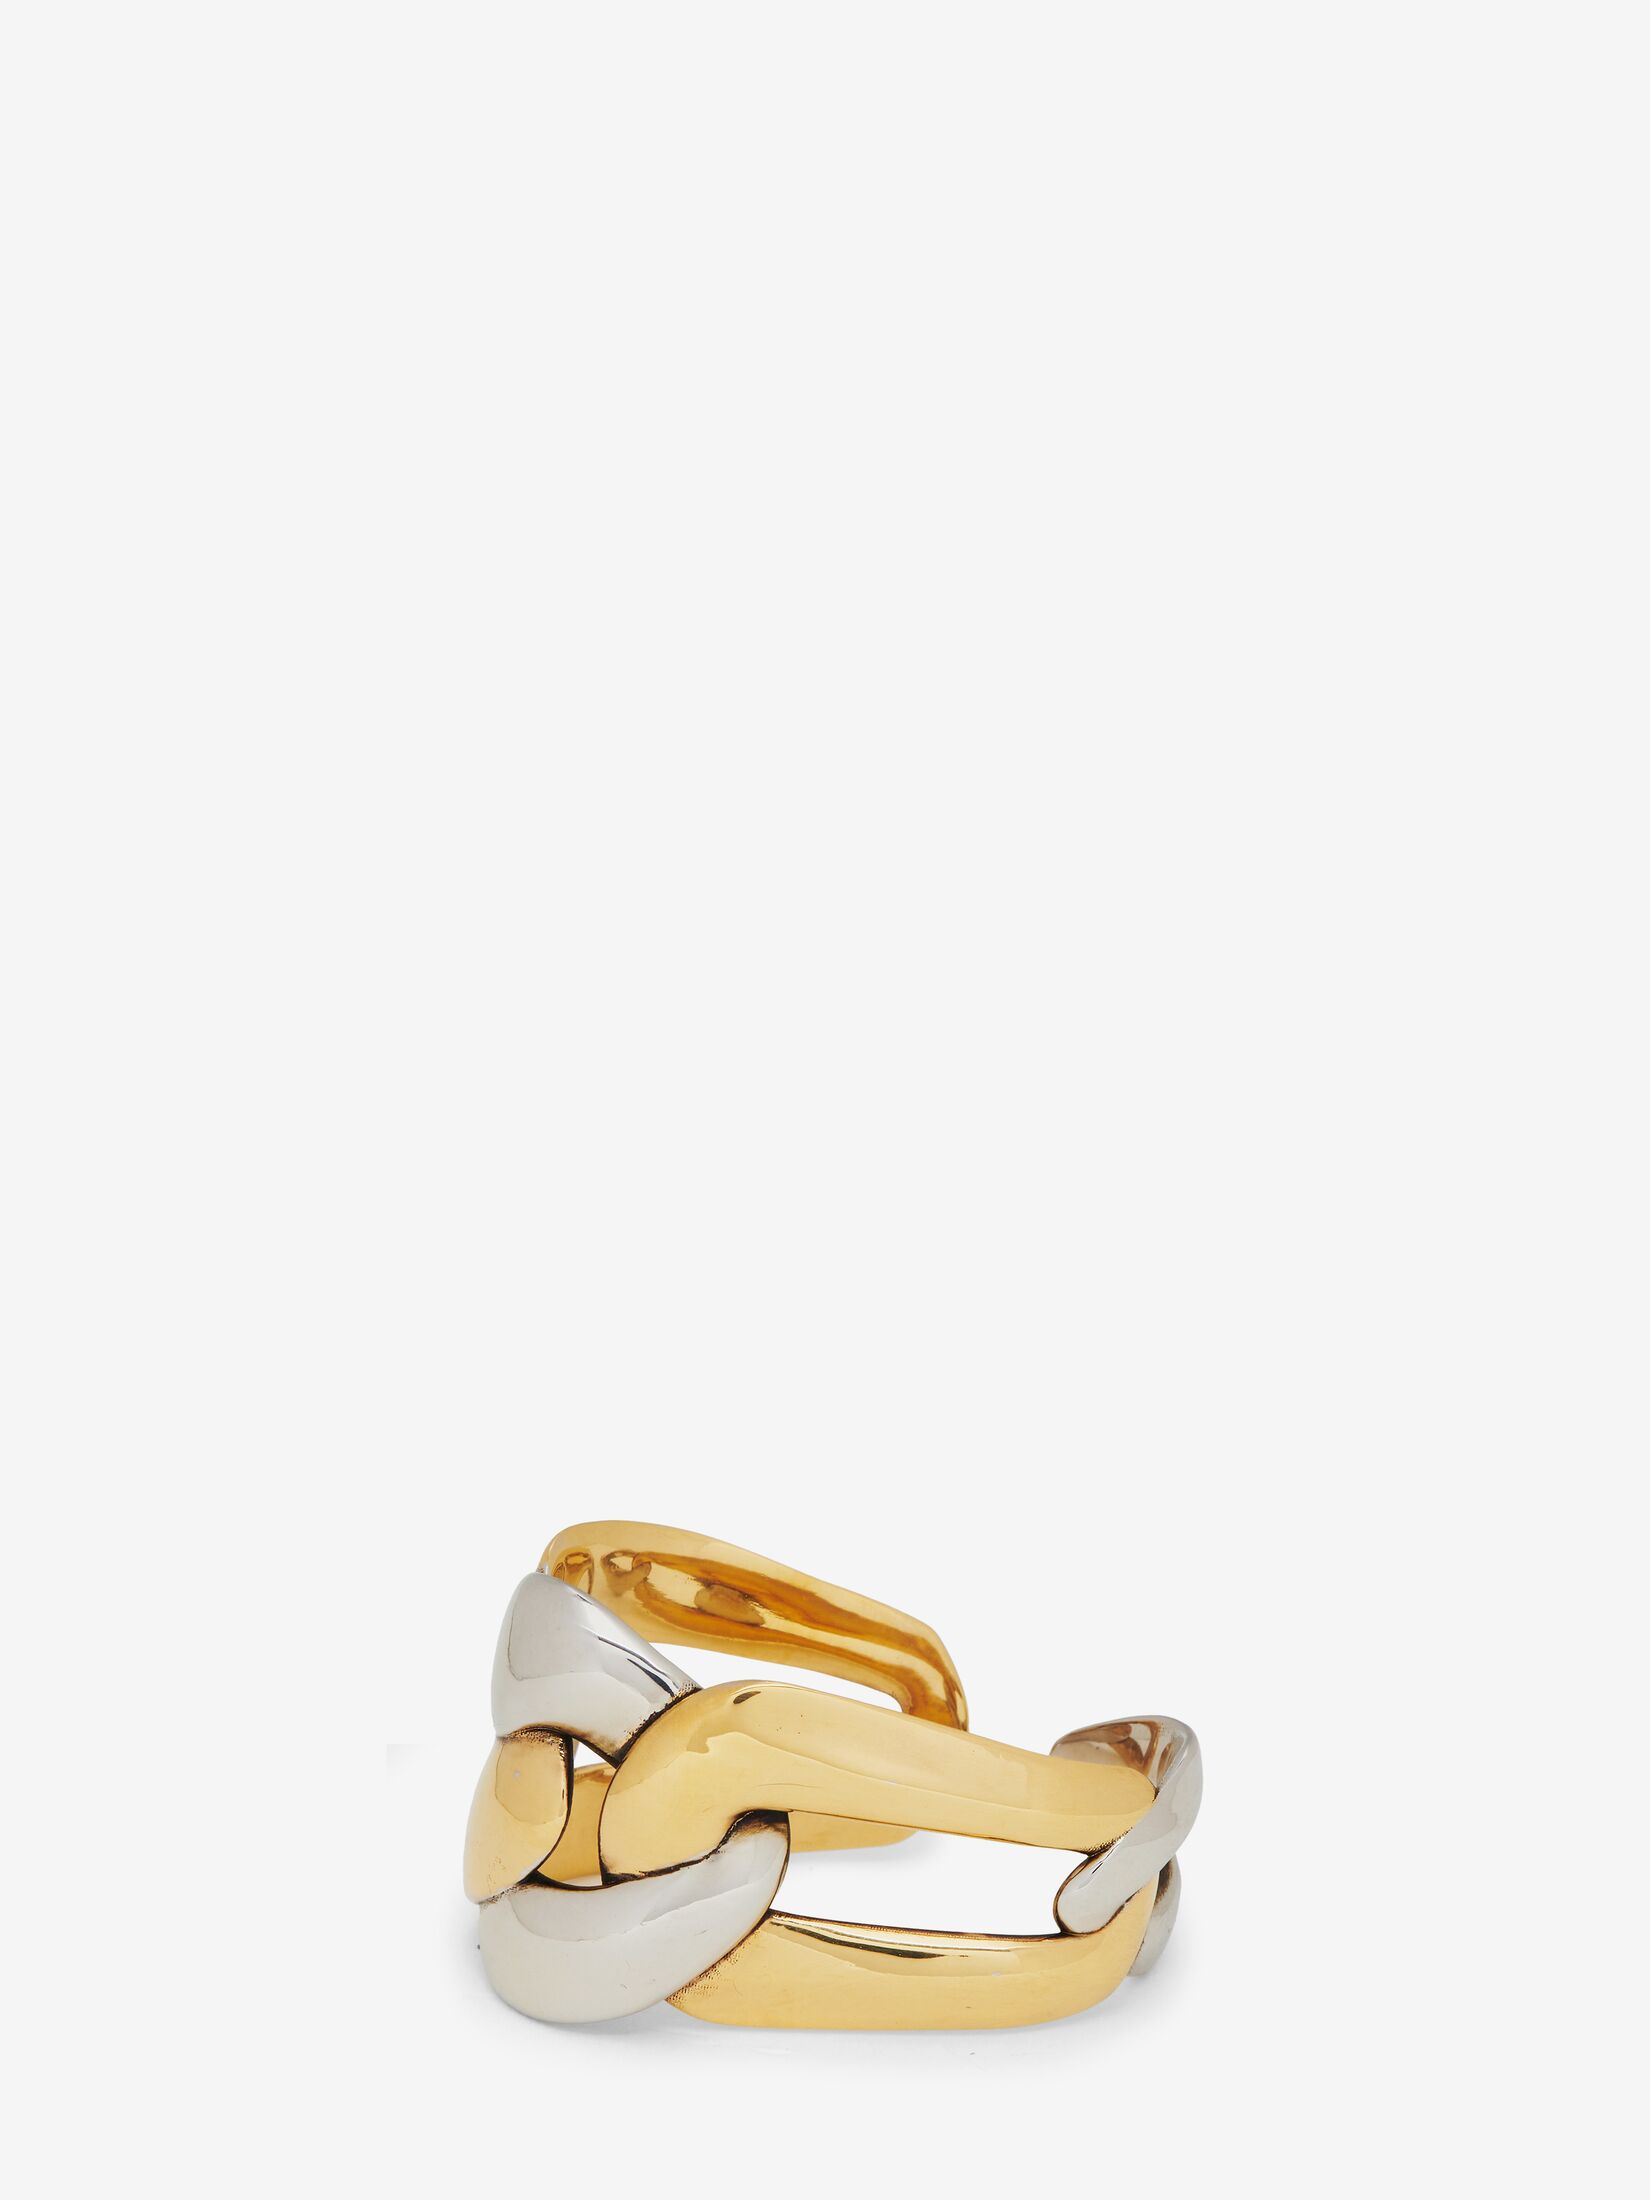 Chain Double Ring